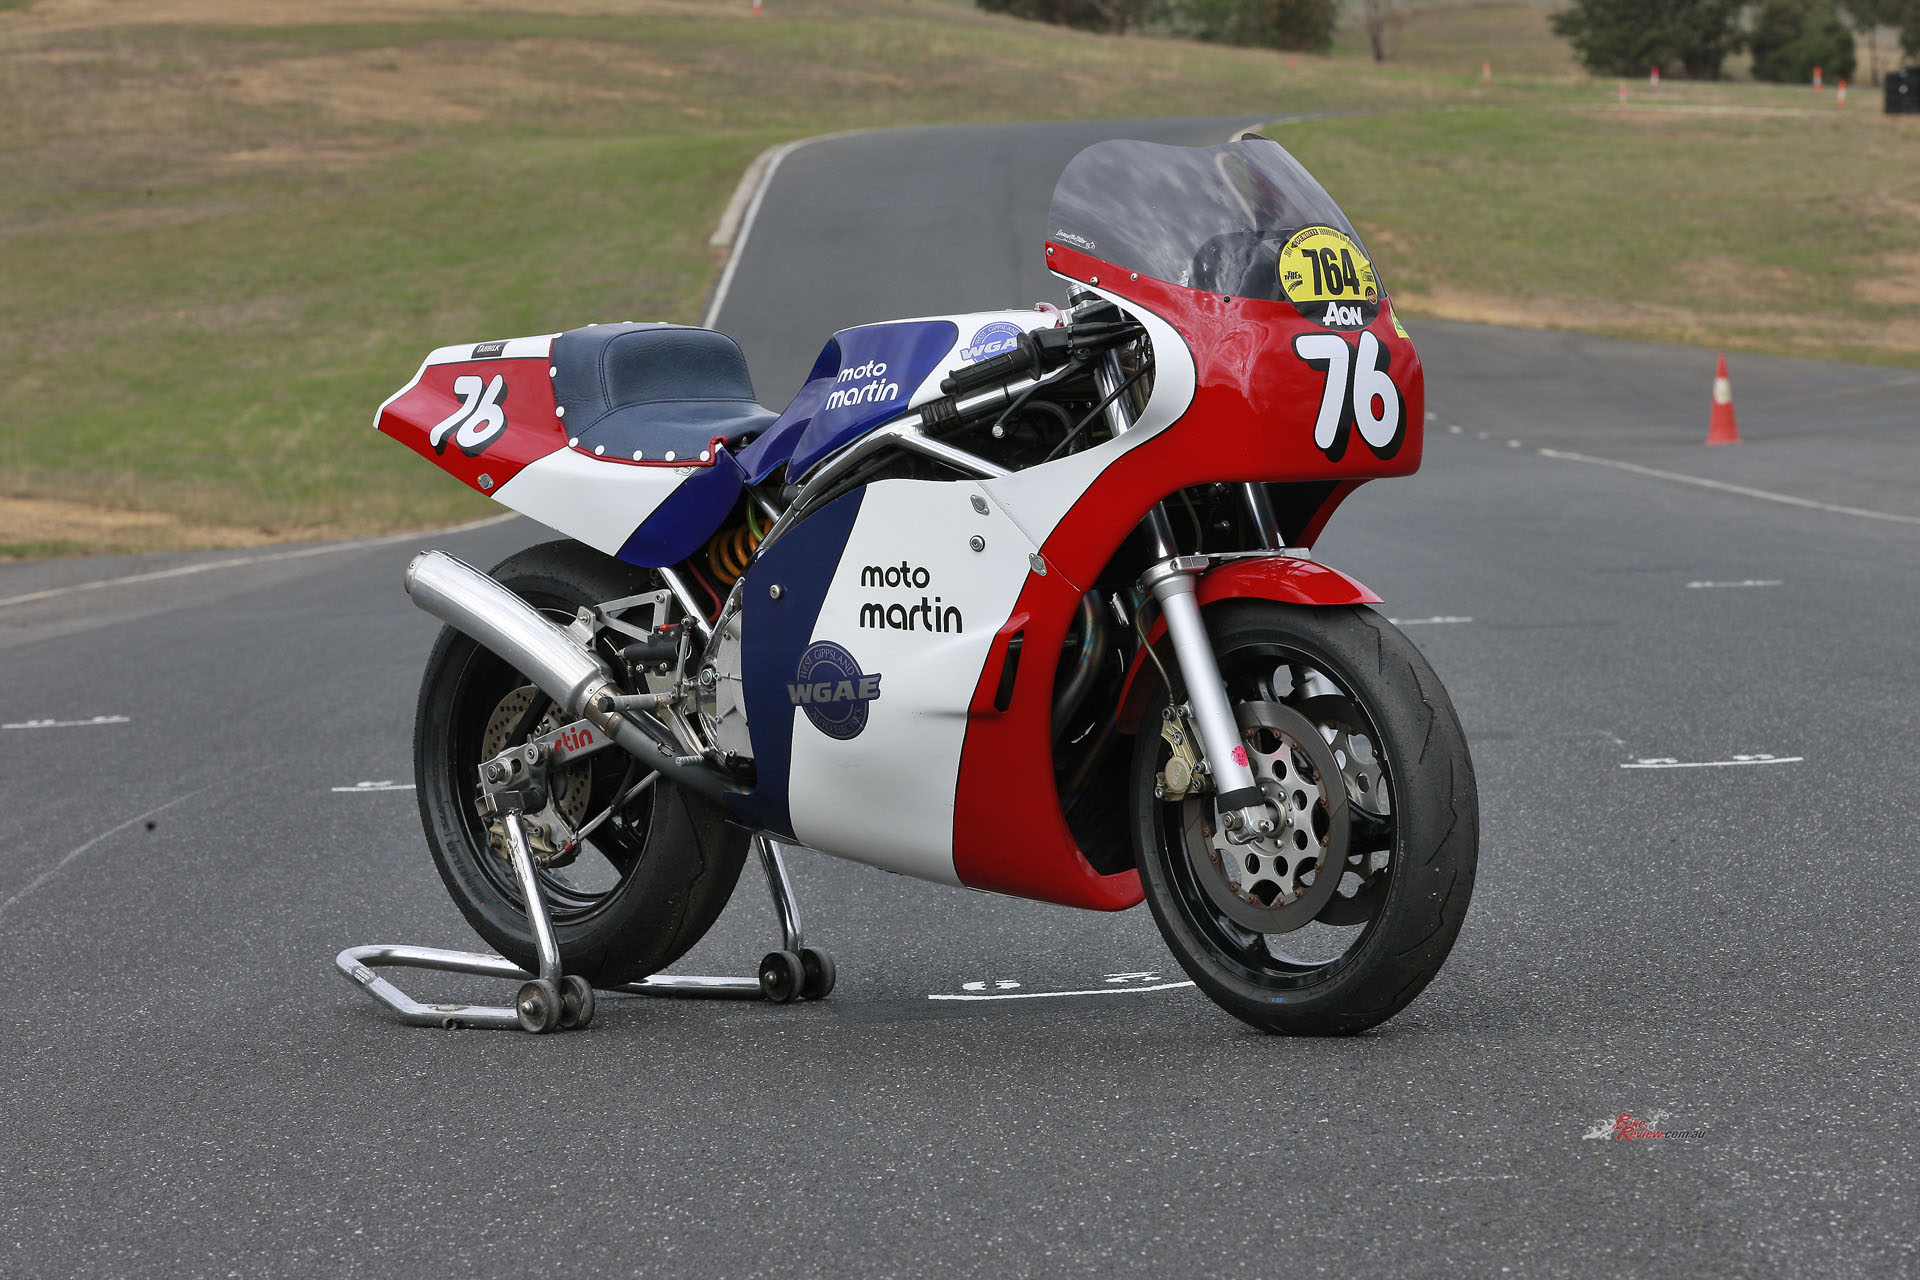 Webster used his decades of Superbike racing to set up the Moto Martin's suspension immaculately.